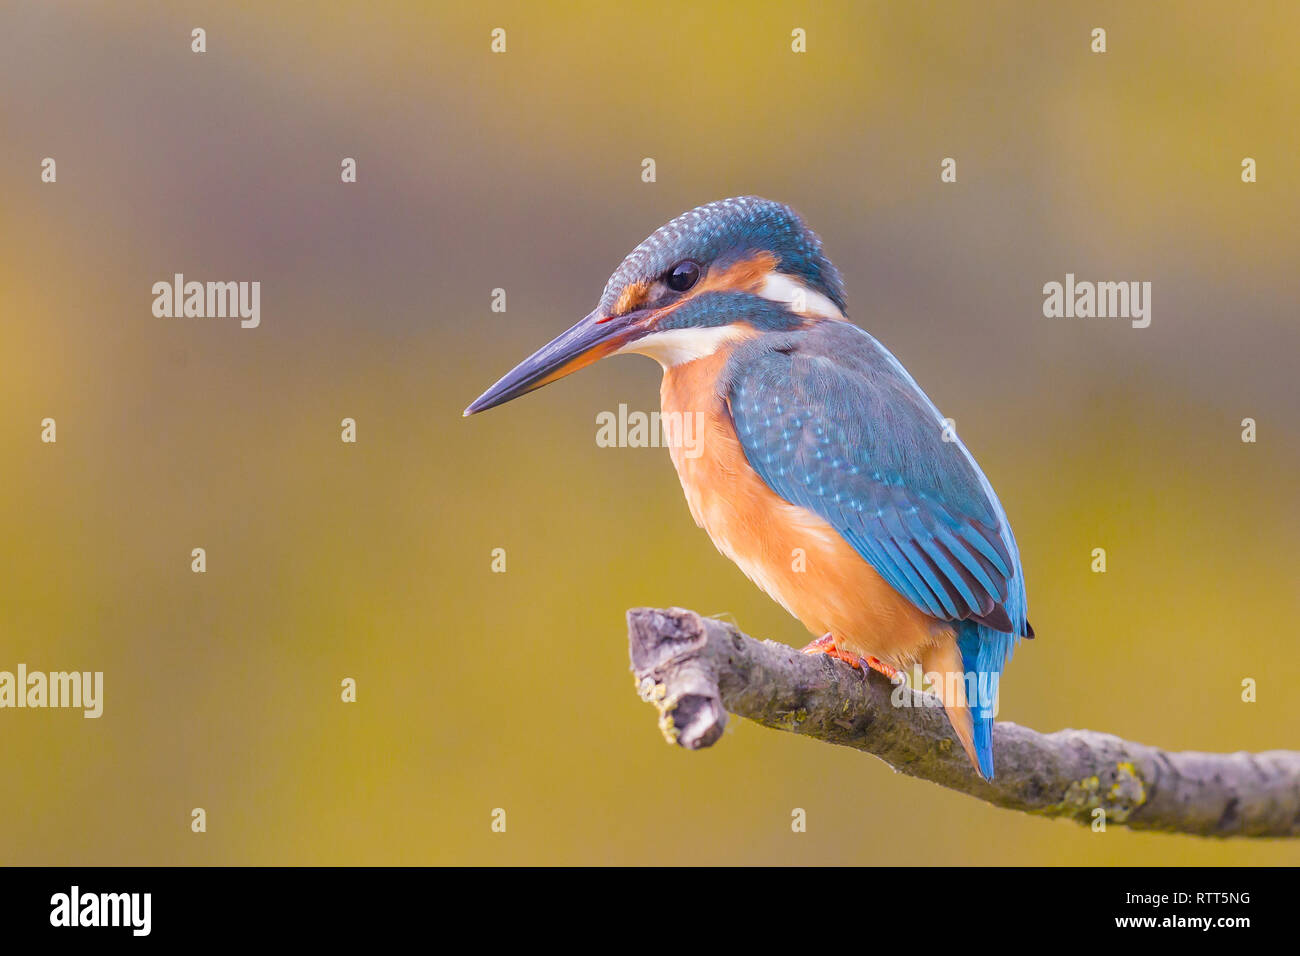 Common kingfisher (Alcedo atthis) sitting on a branch Stock Photo